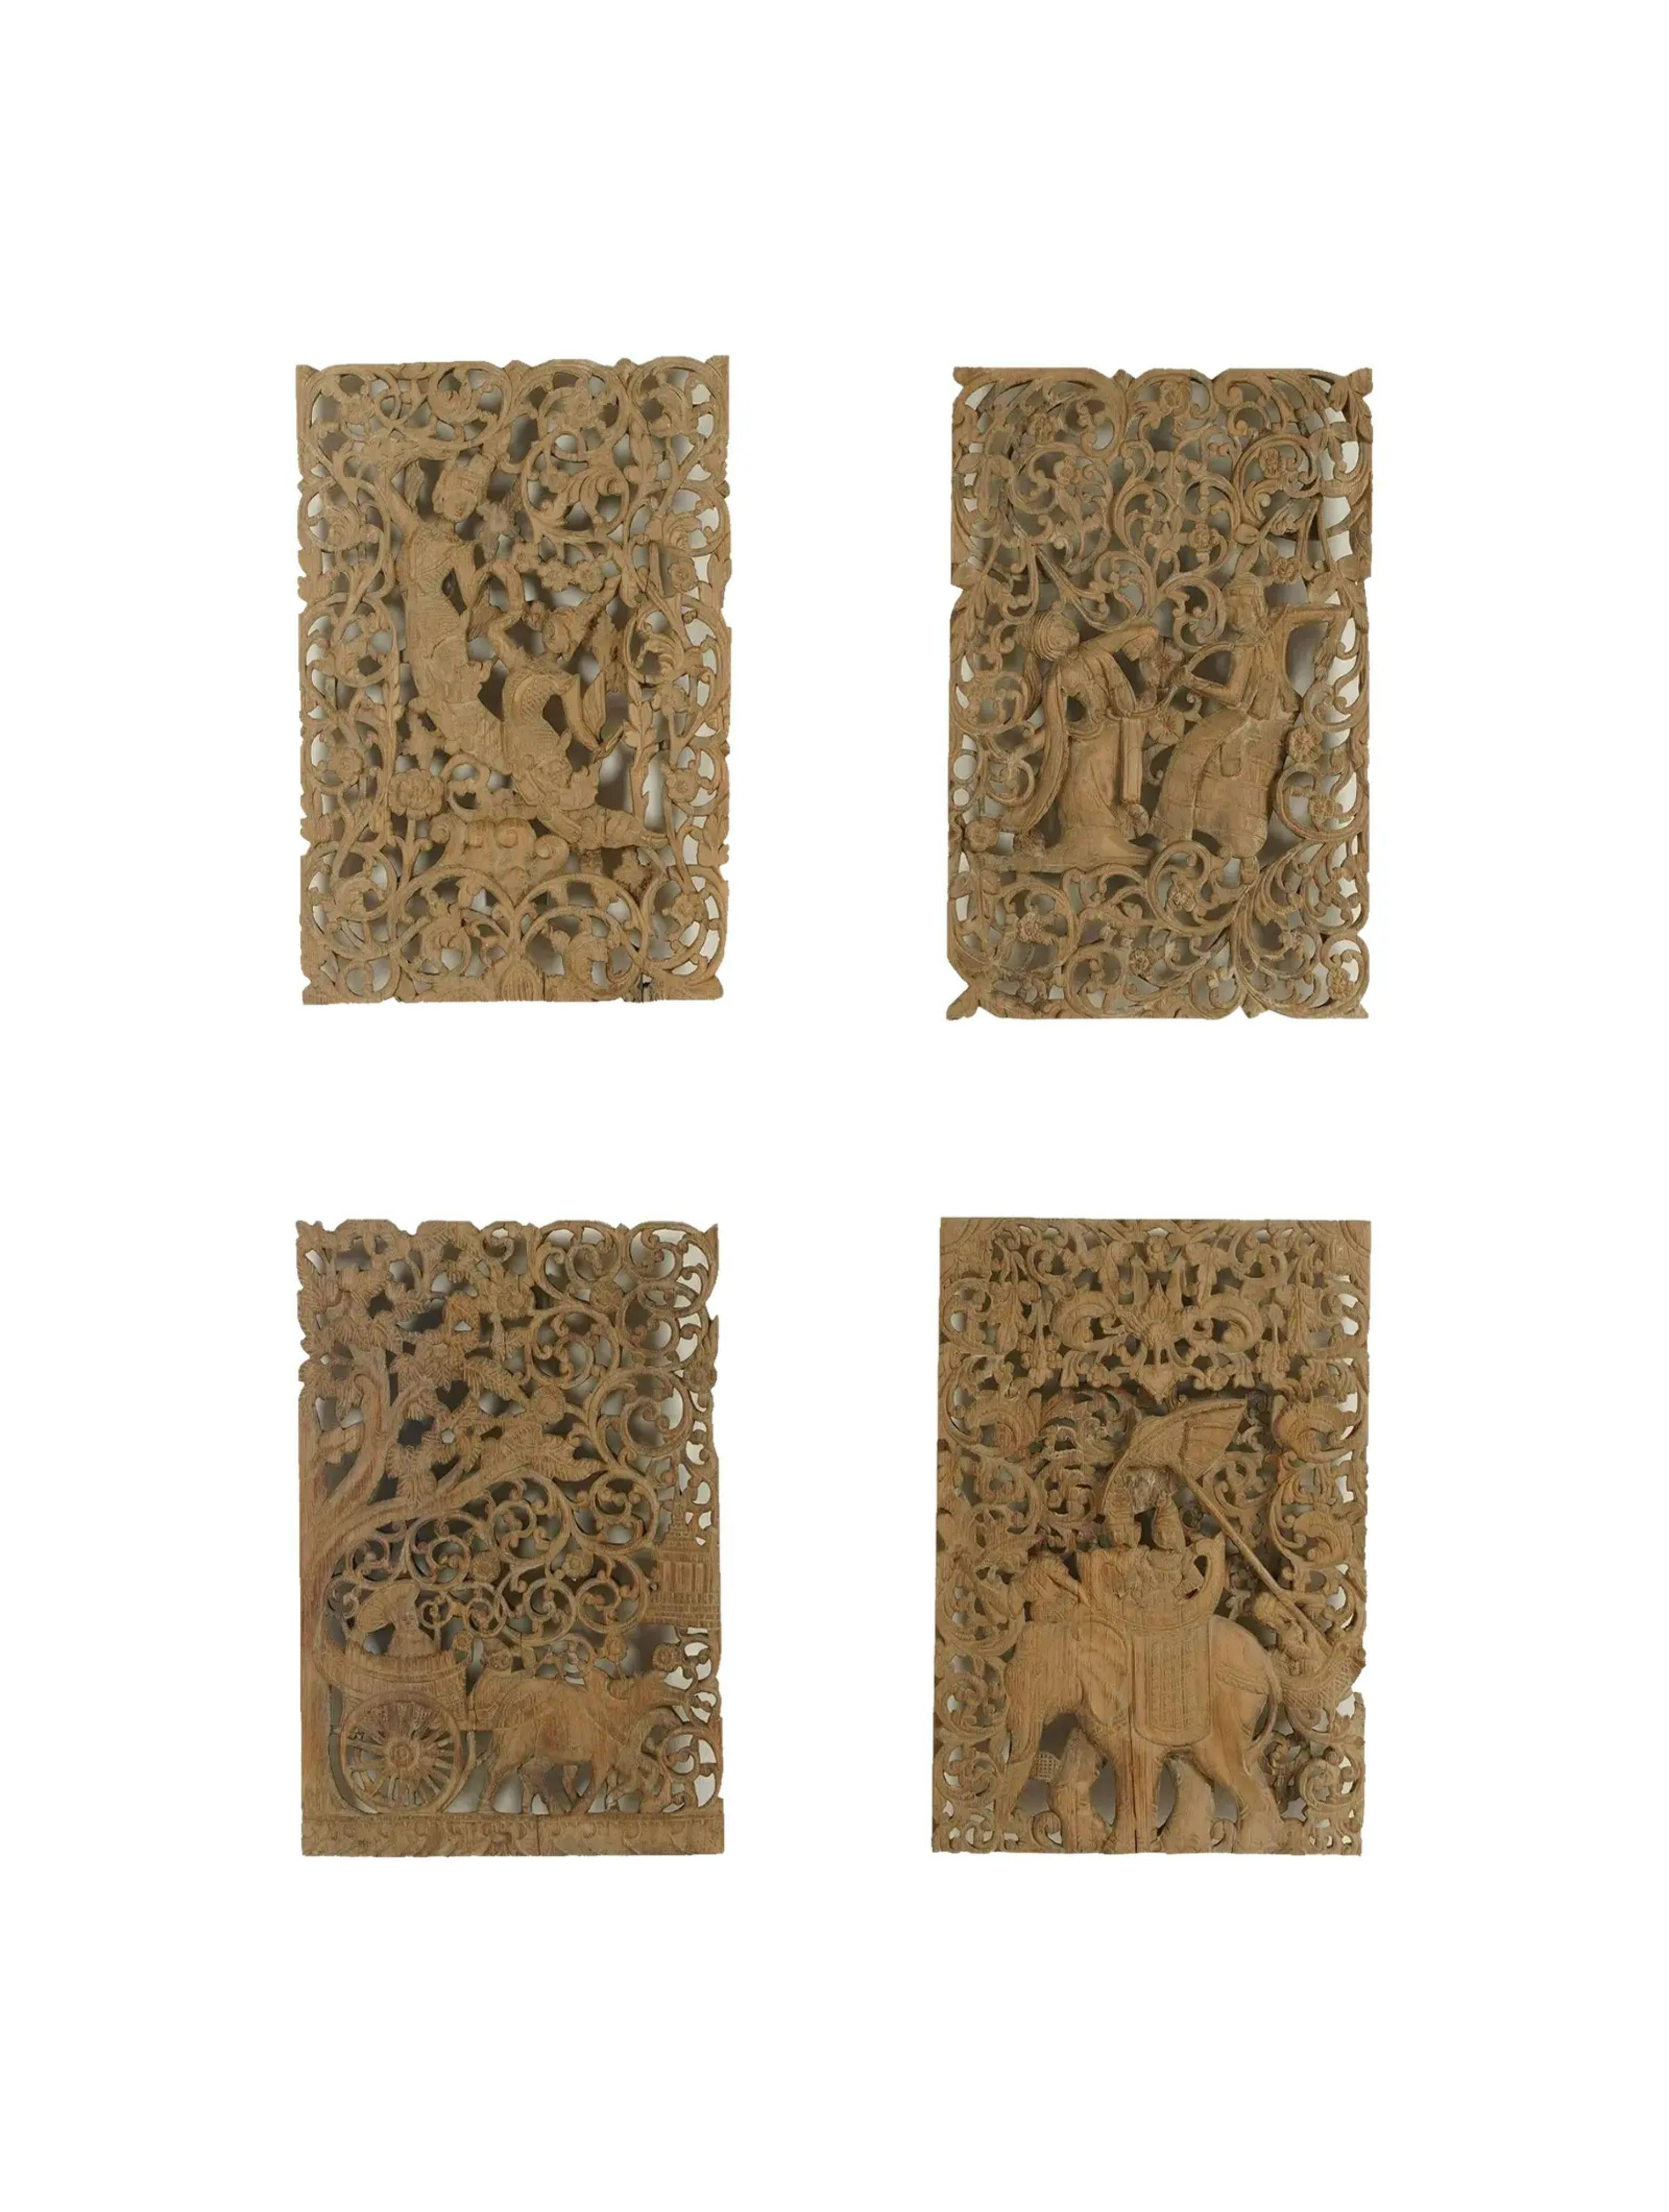 Set of 4 Antique Asian Temple Carvings, 19th Century